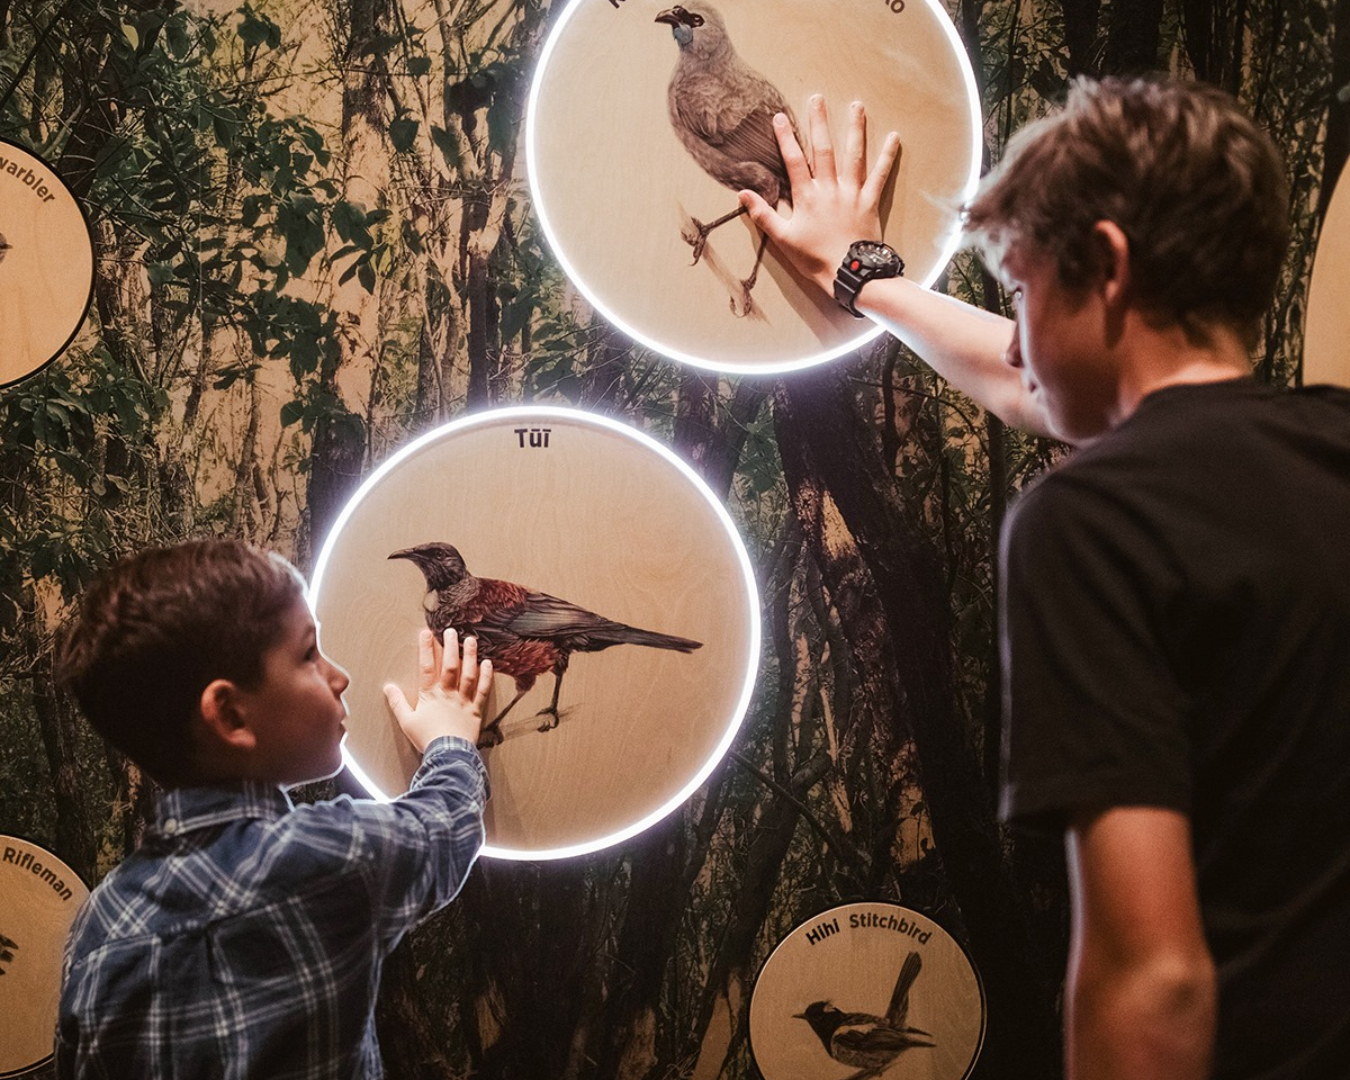 Two boys press buttons with pictures of native birds on them, to hear their respective birdsongs.